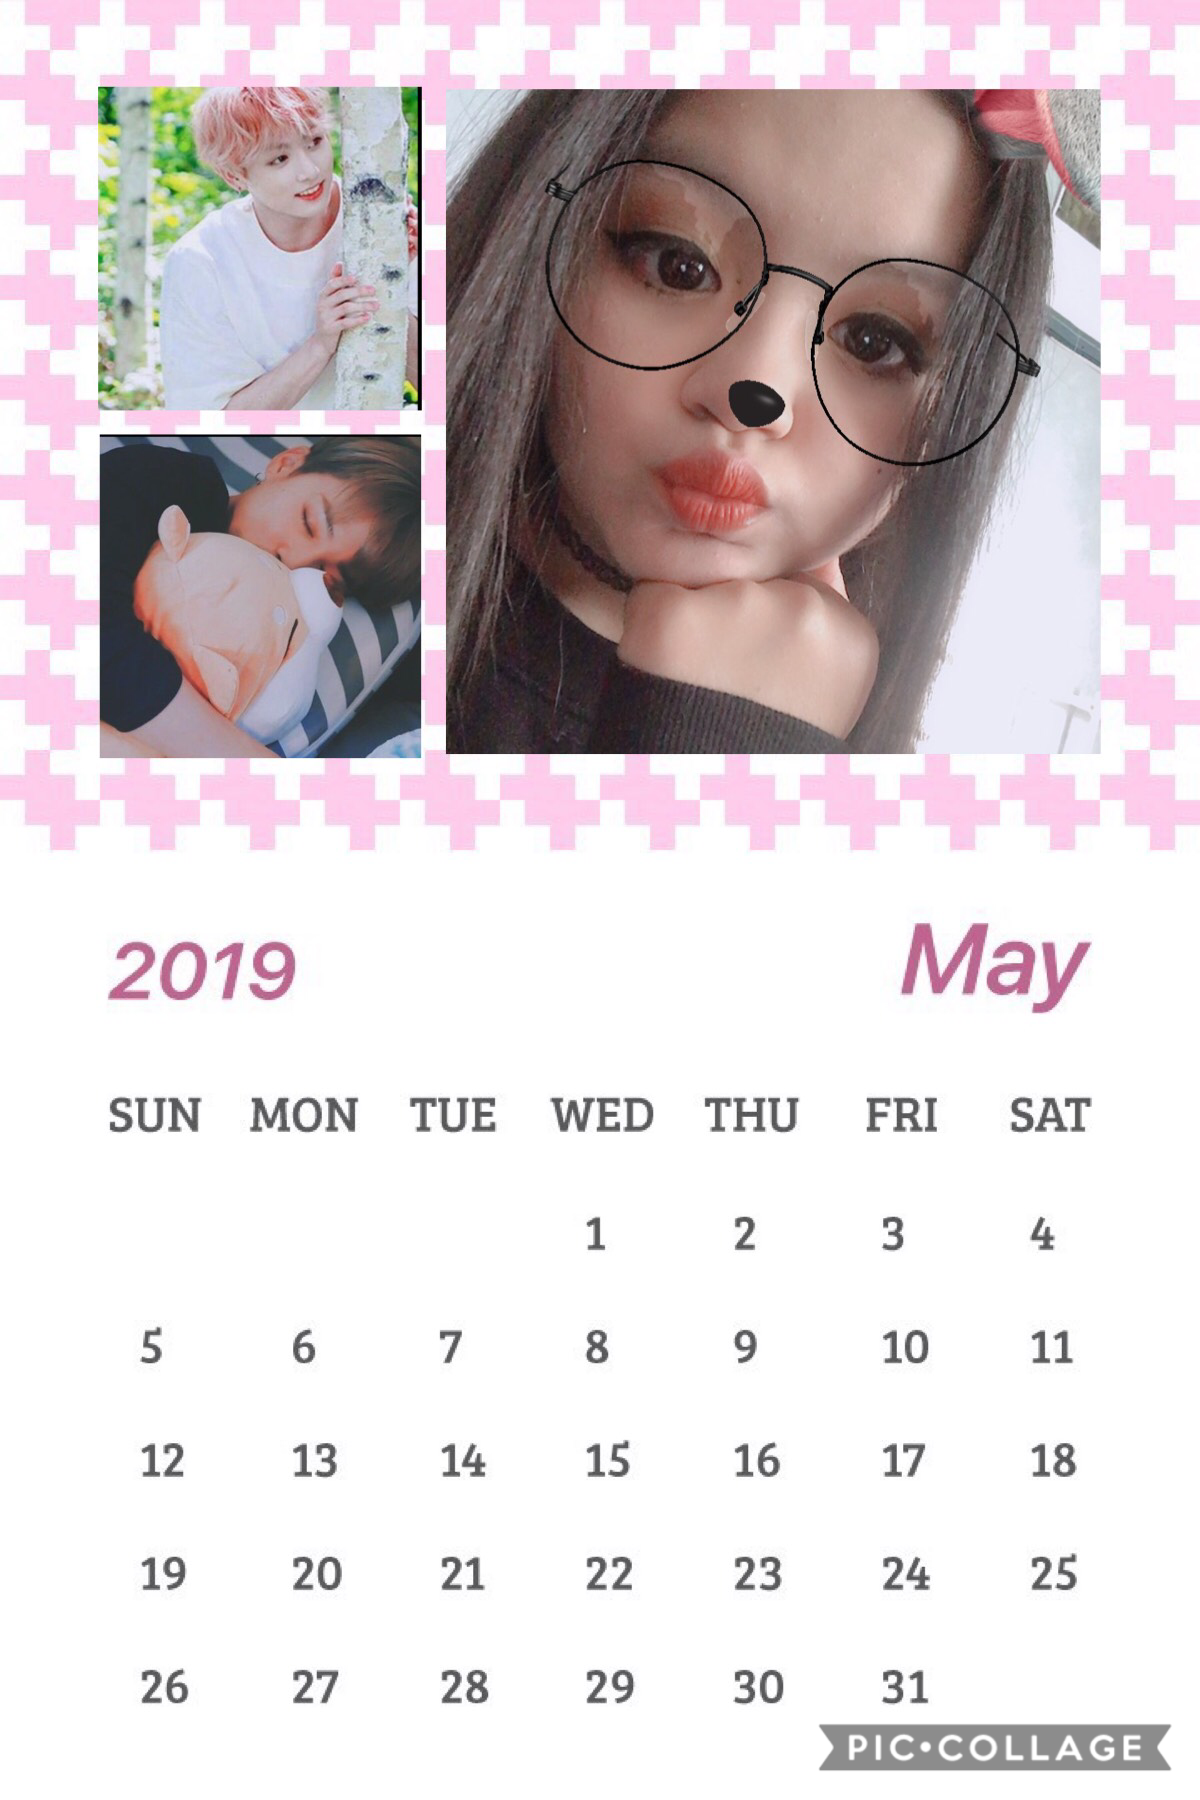 The new calender 2019